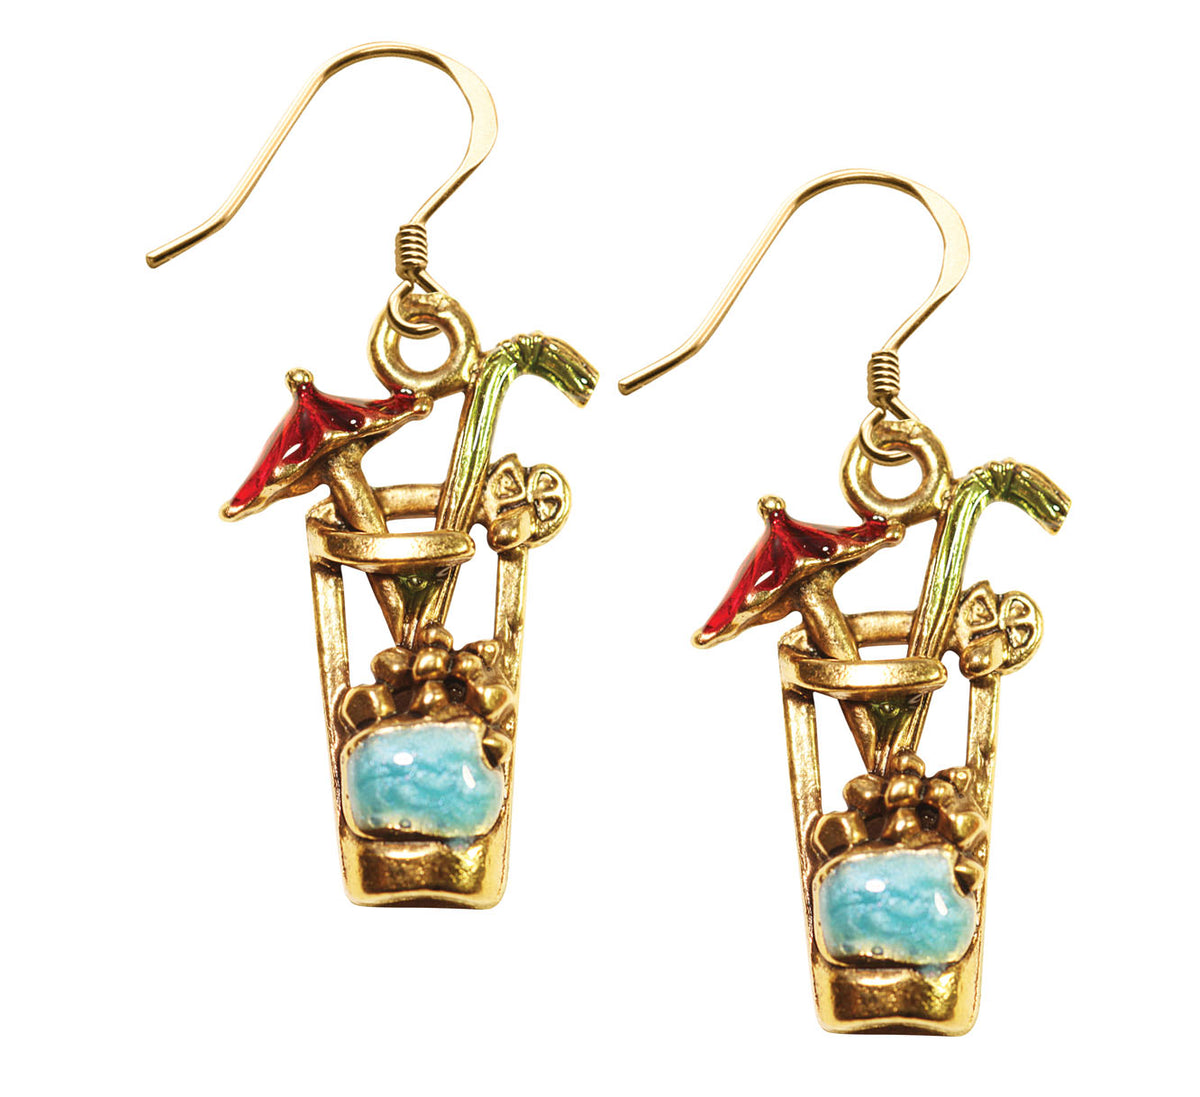 Cocktail Drink Charm Earrings in Gold - YuppyCollections